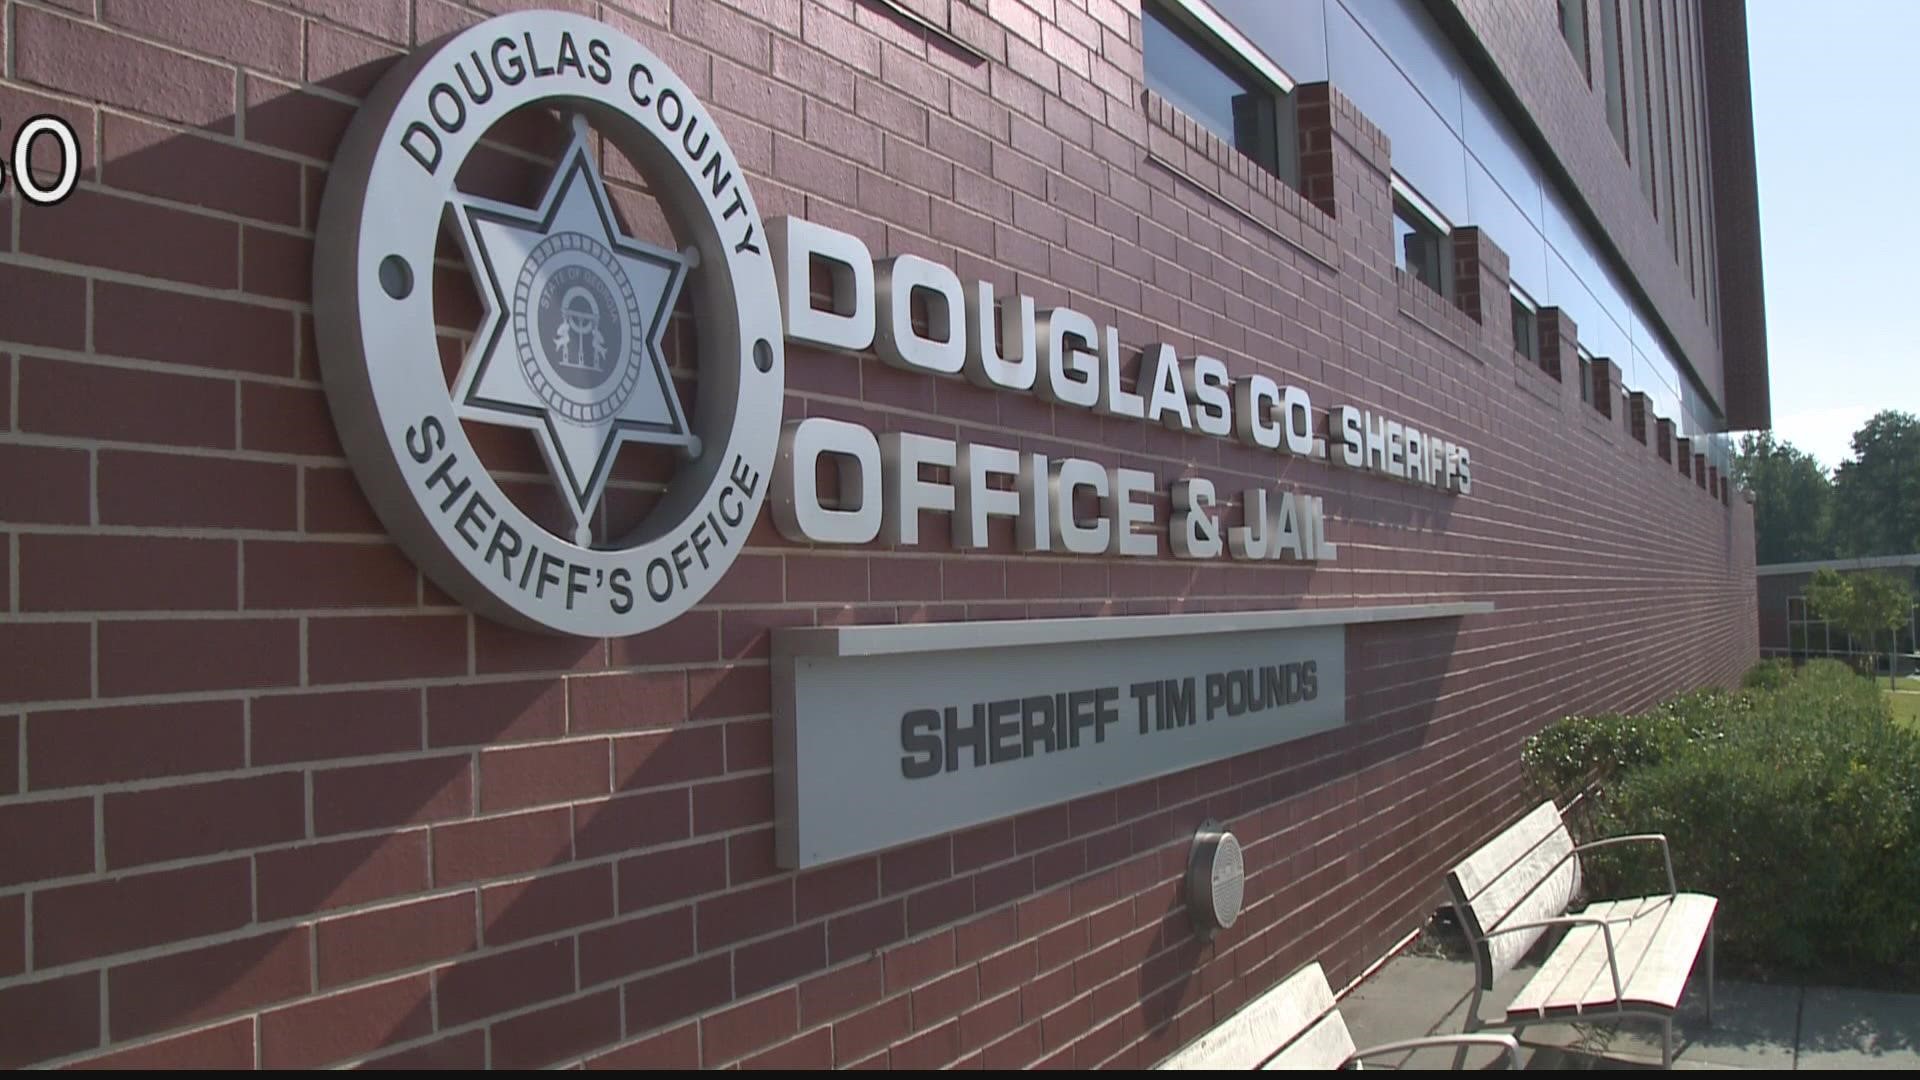 The sheriff's office is looking to hire 59 new deputies and has had to reduce visitation times at the county jail because of being stretched so thin.